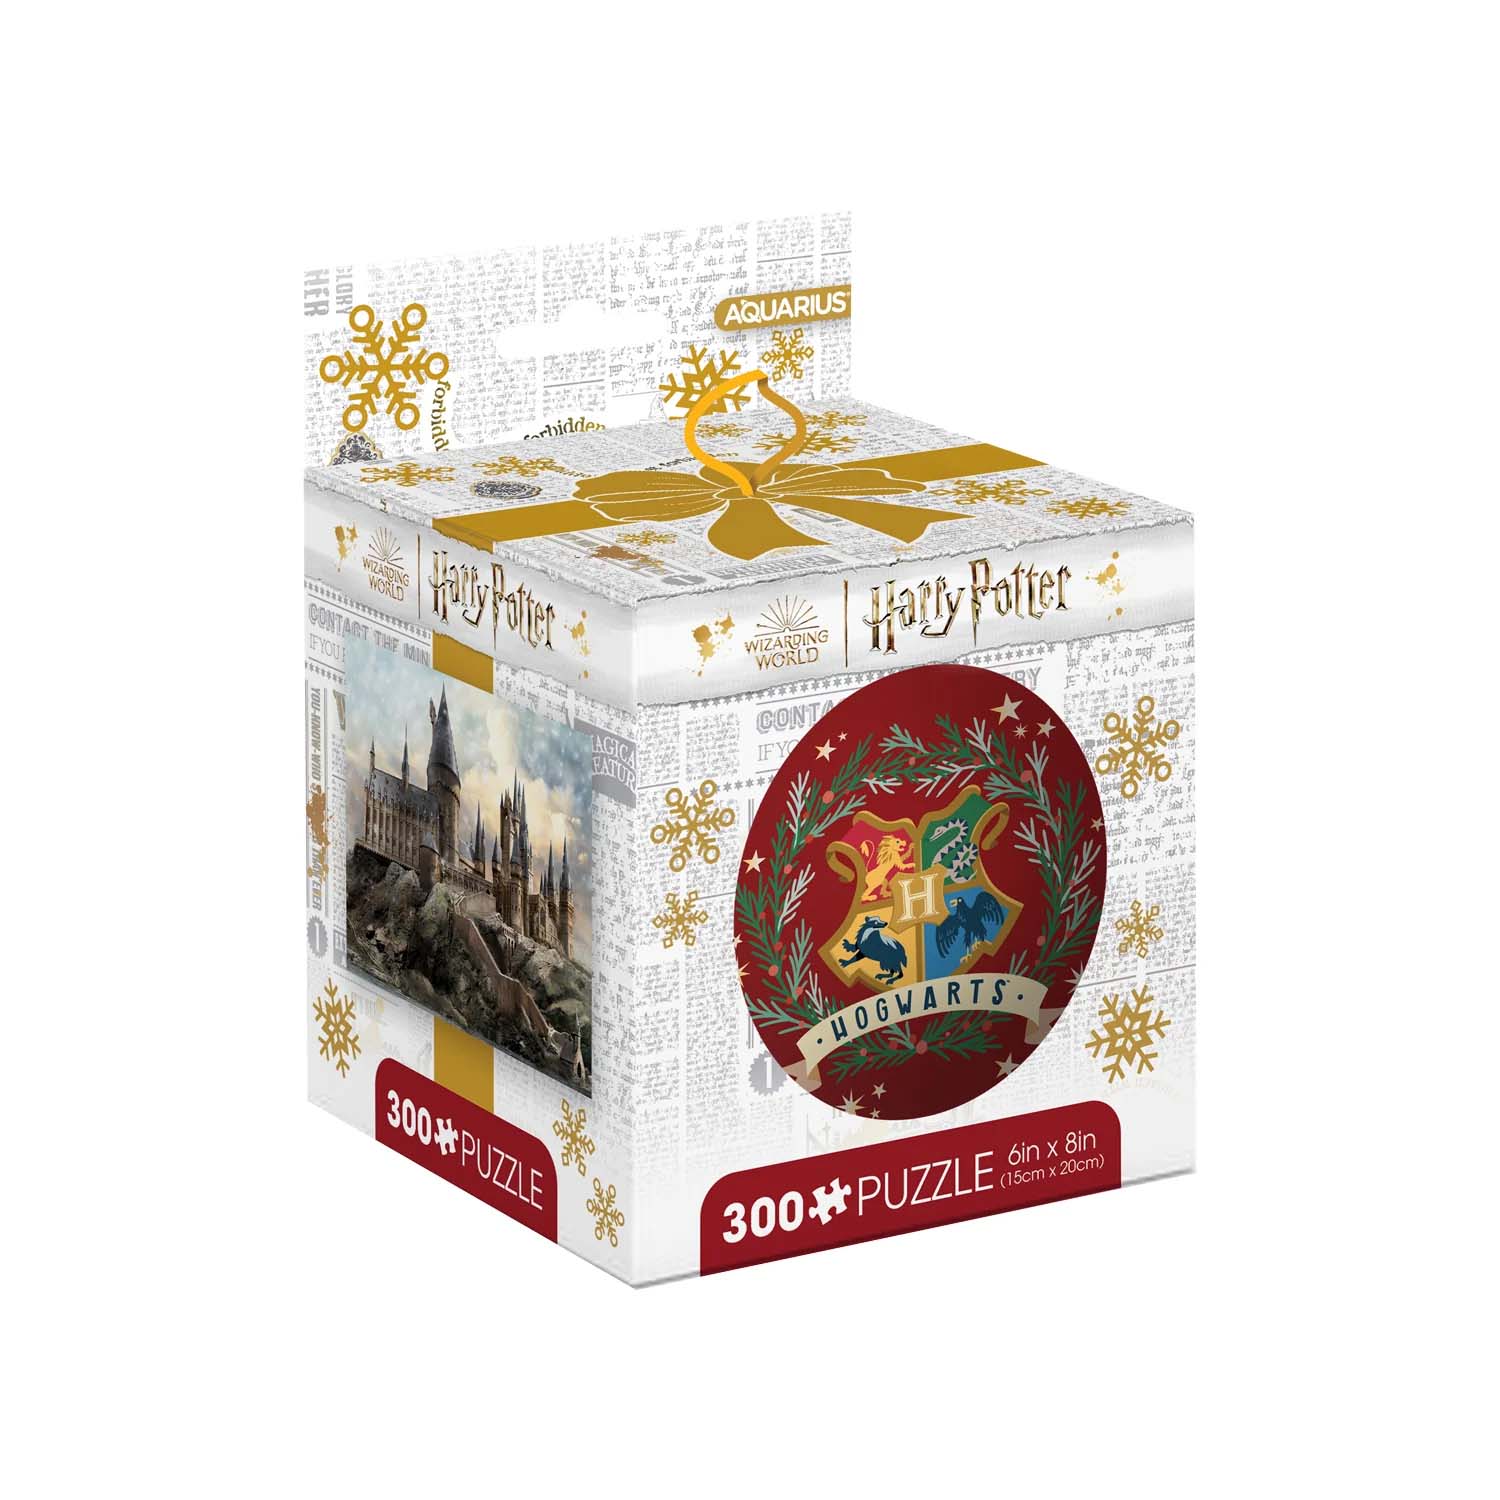 Harry Potter in Tin Globe Movies & TV Jigsaw Puzzle